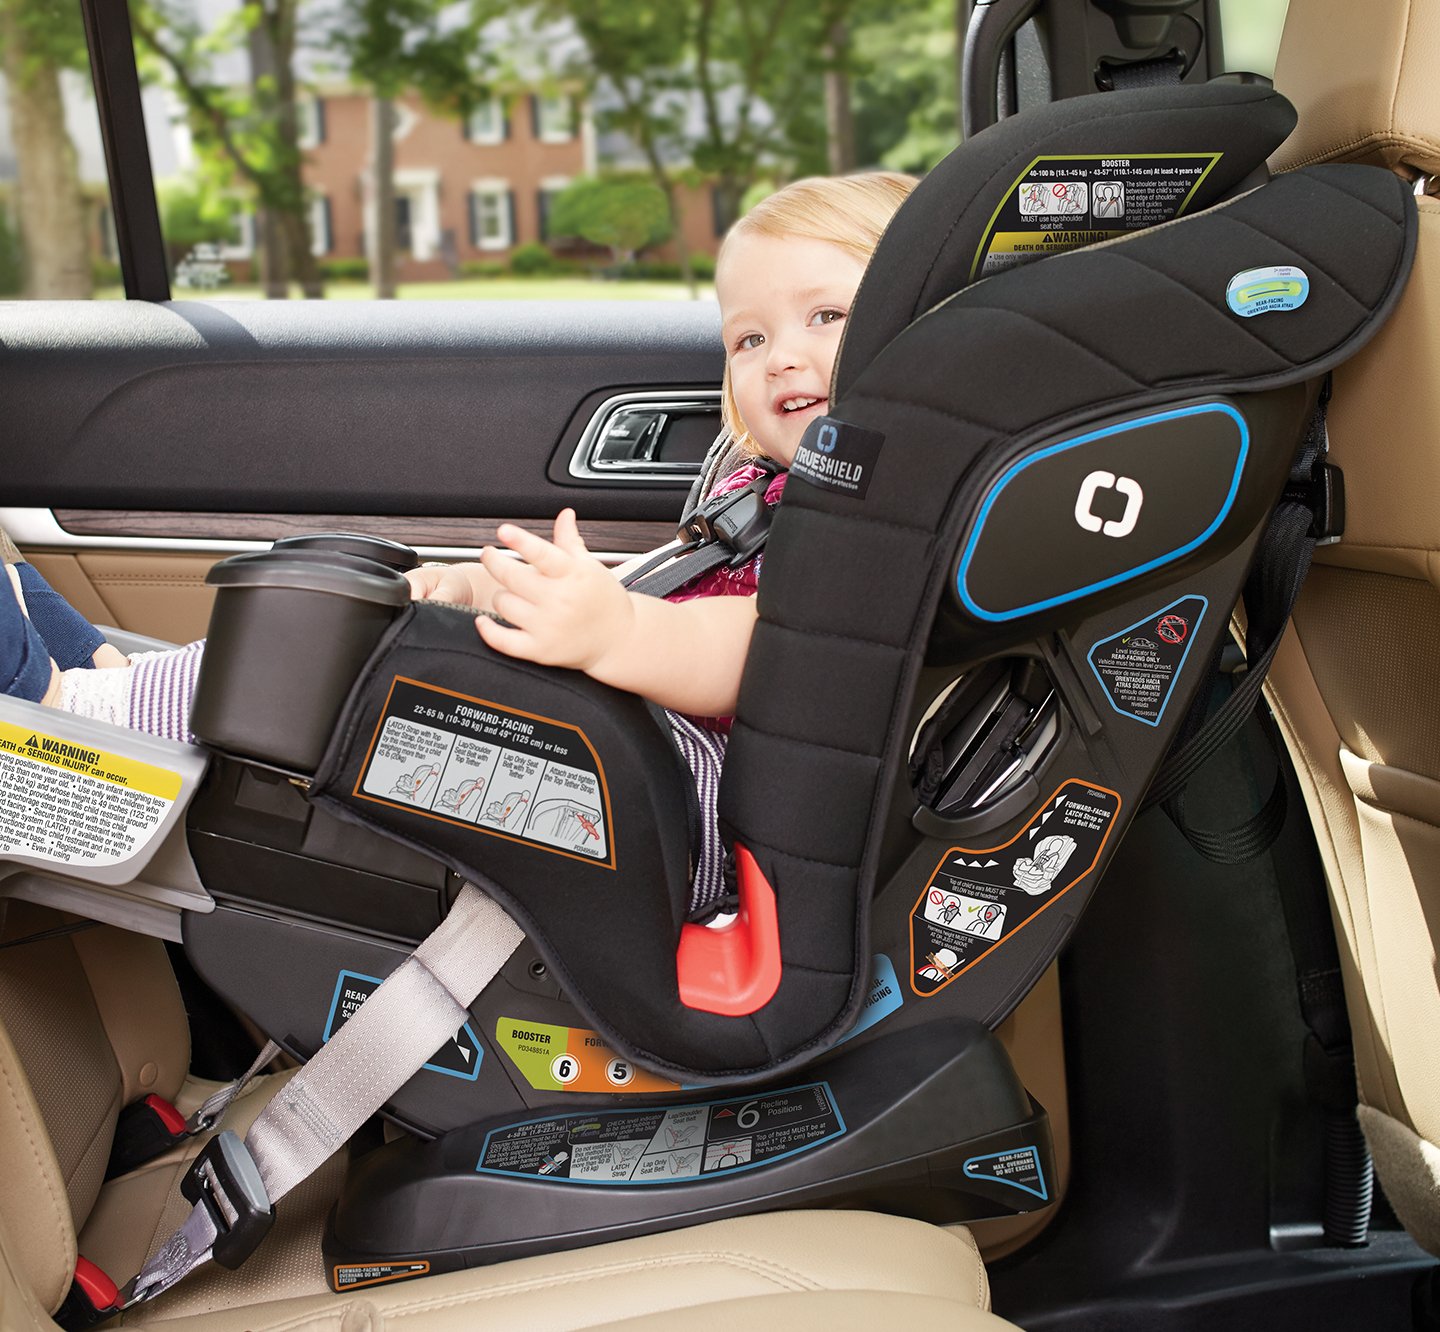 Graco S Car Seat Safety Standards - How To Install Graco Baby Car Seat With Seatbelt